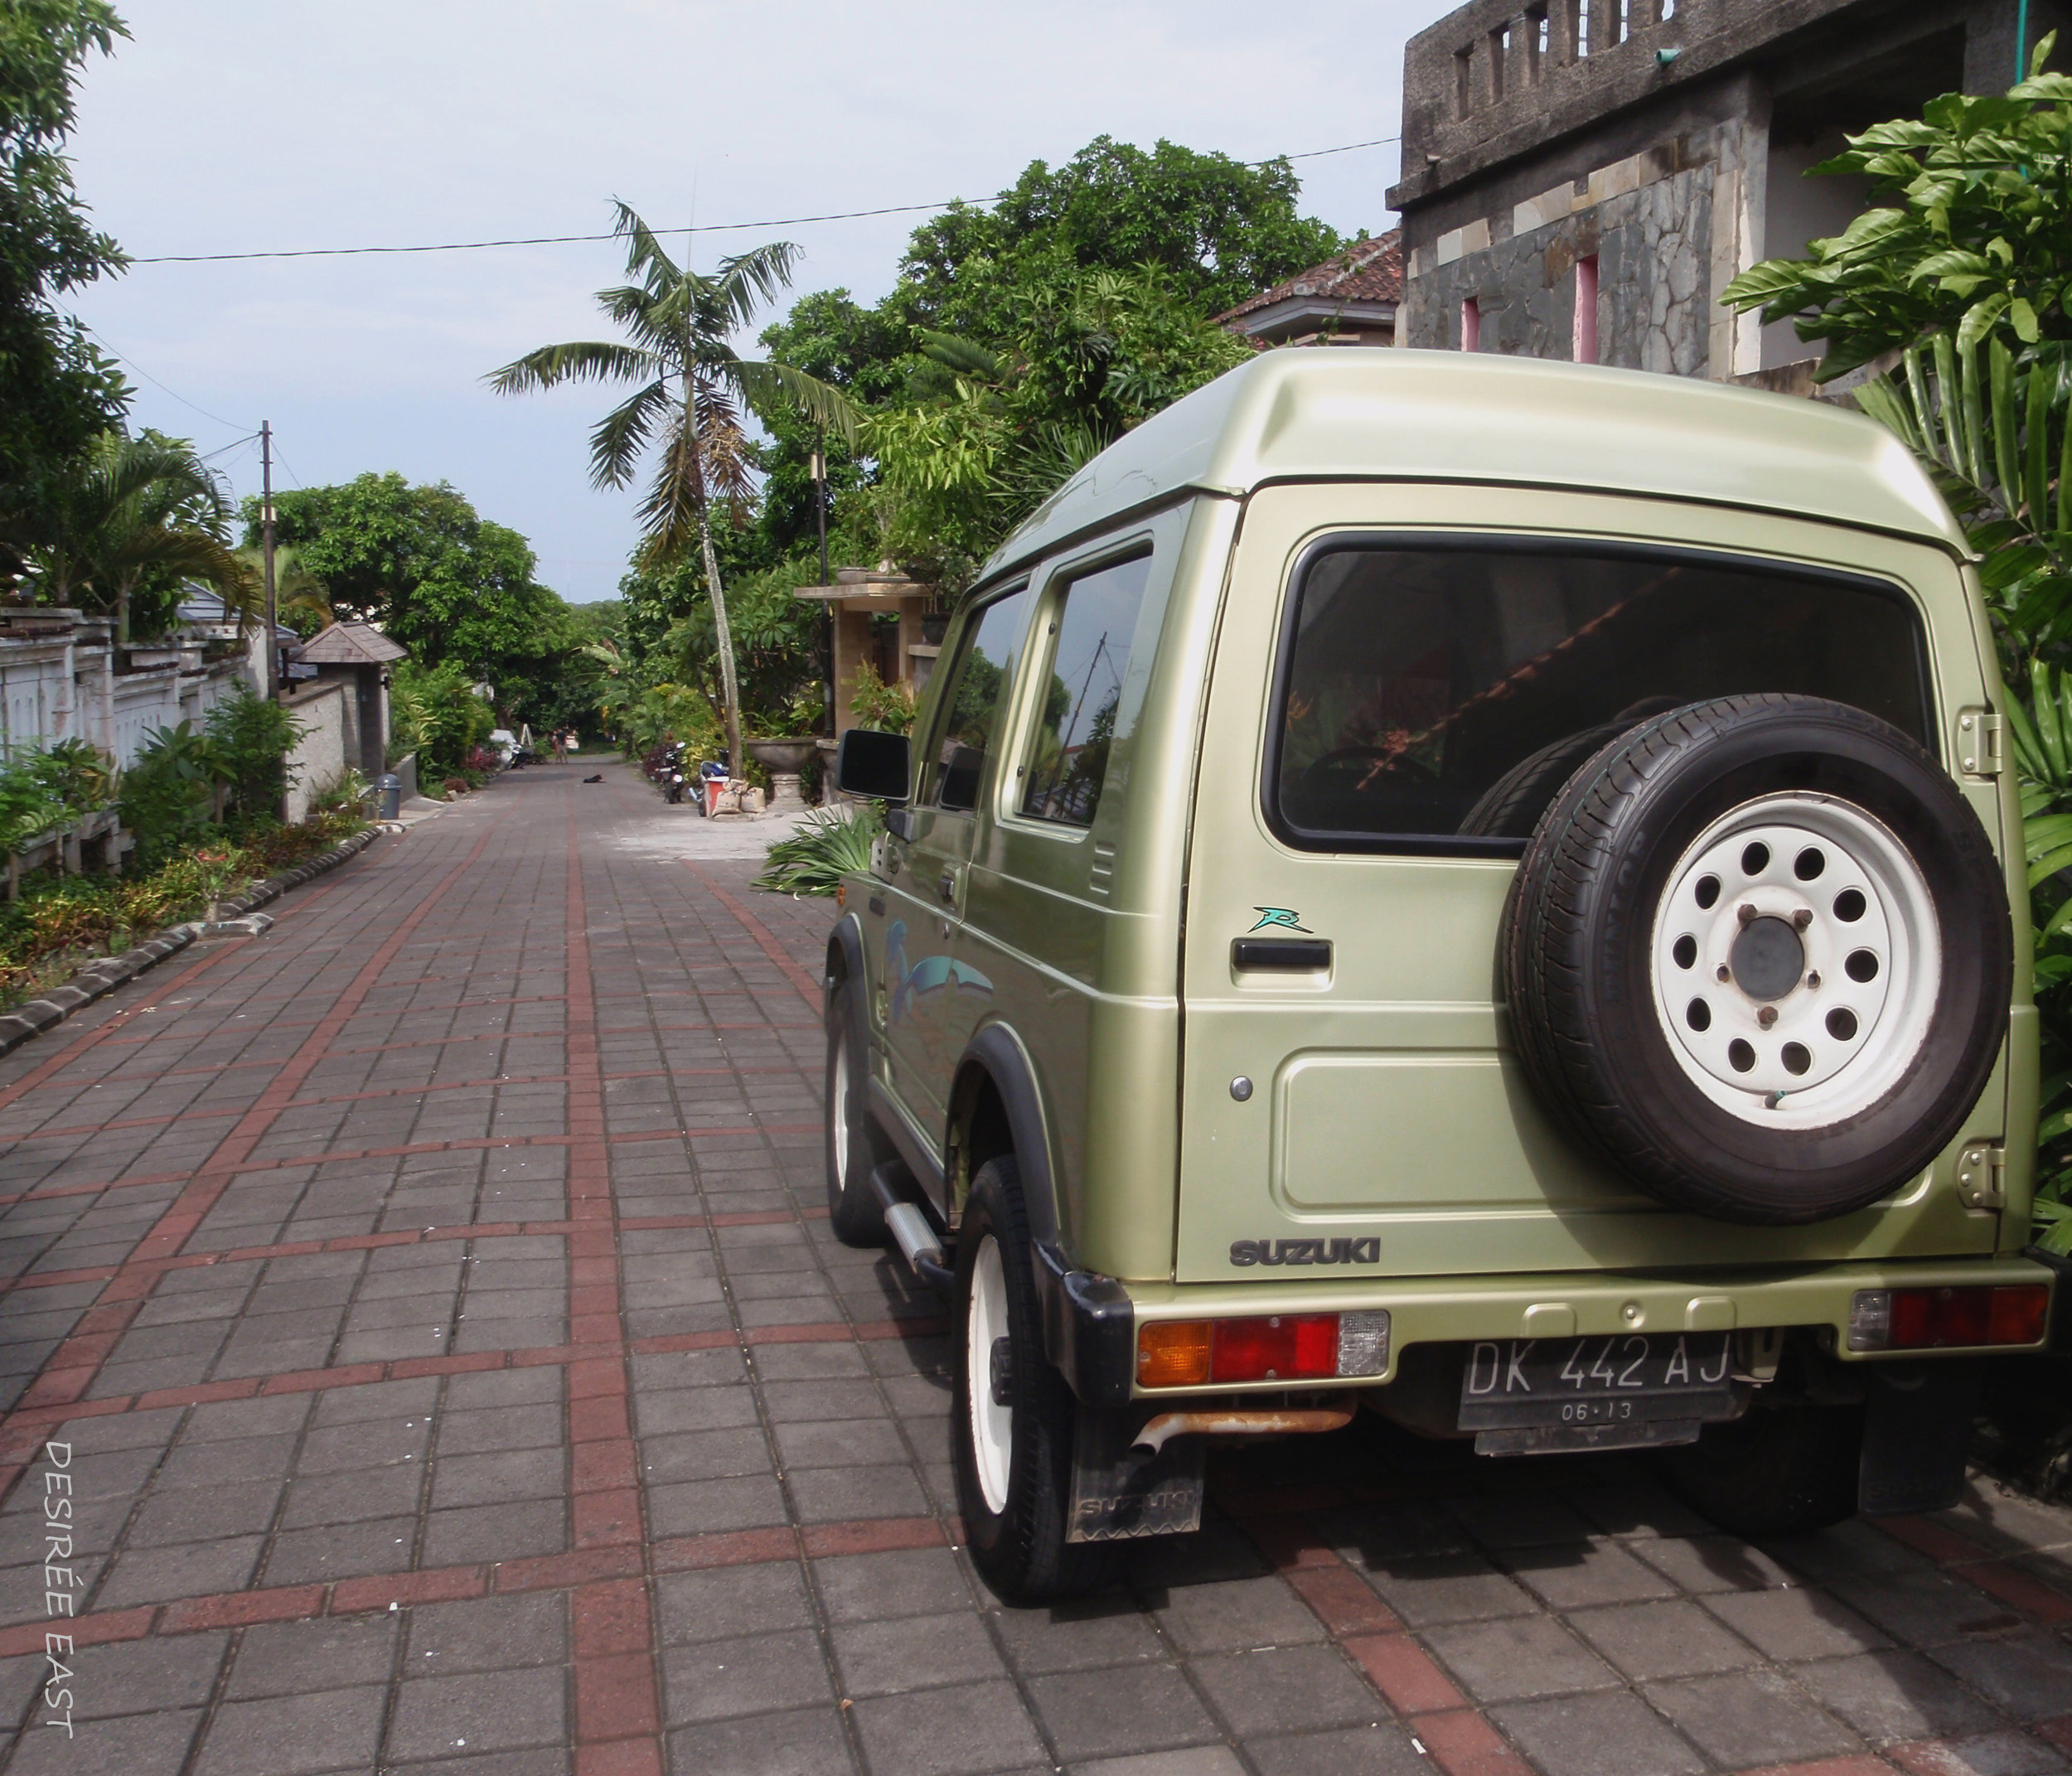 parking at andree homestay. bali, indonesia. photo by desiree east